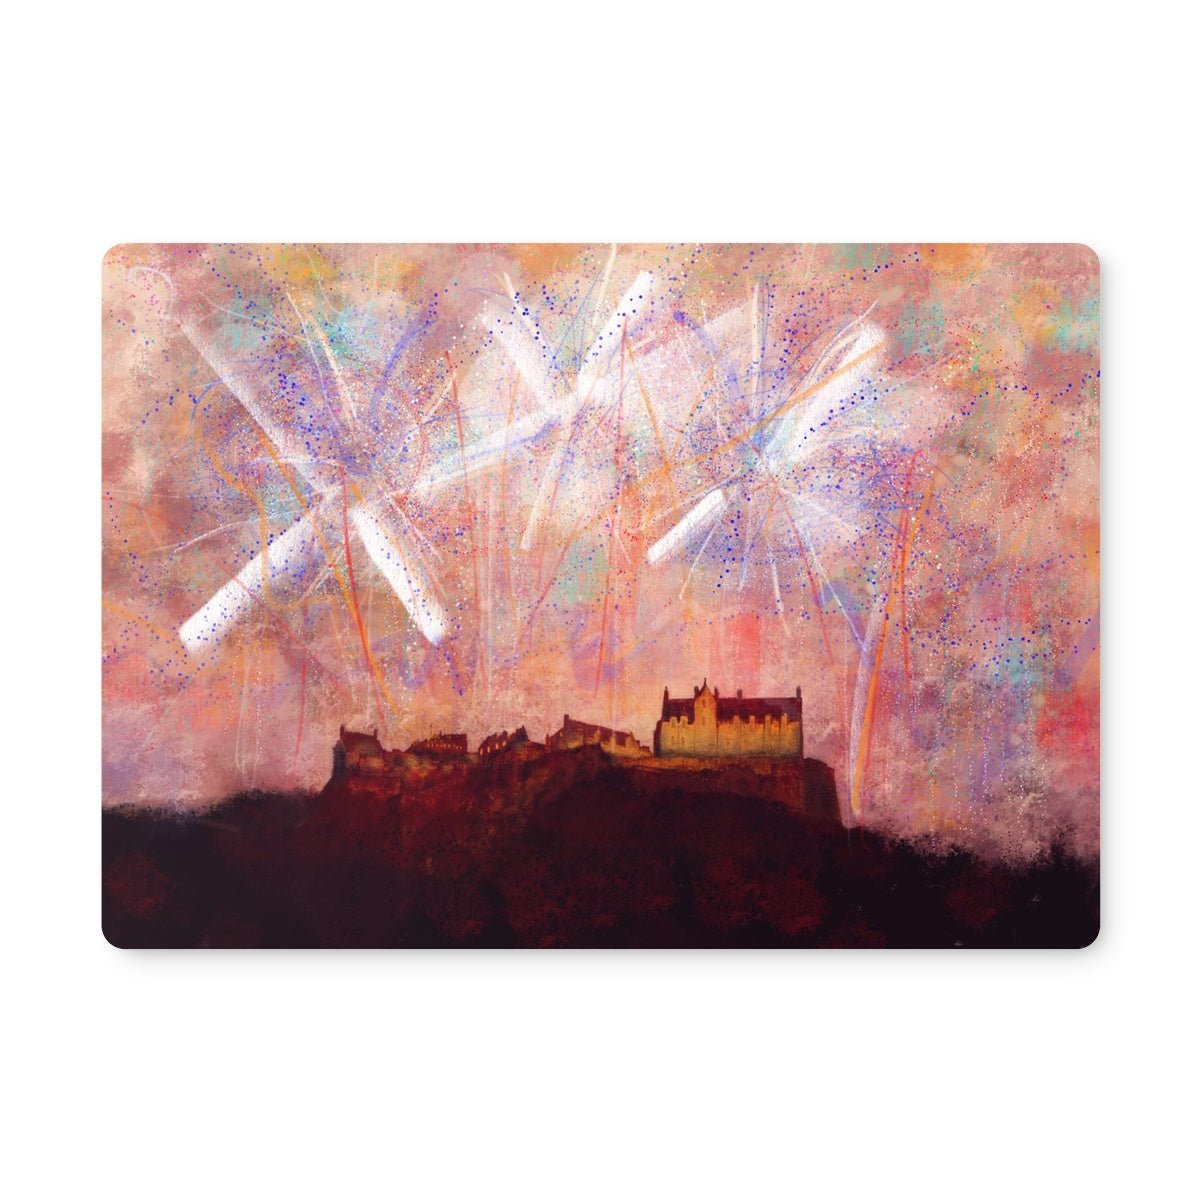 Edinburgh Castle Fireworks Art Gifts Placemat-Placemats-Edinburgh & Glasgow Art Gallery-2 Placemats-Paintings, Prints, Homeware, Art Gifts From Scotland By Scottish Artist Kevin Hunter